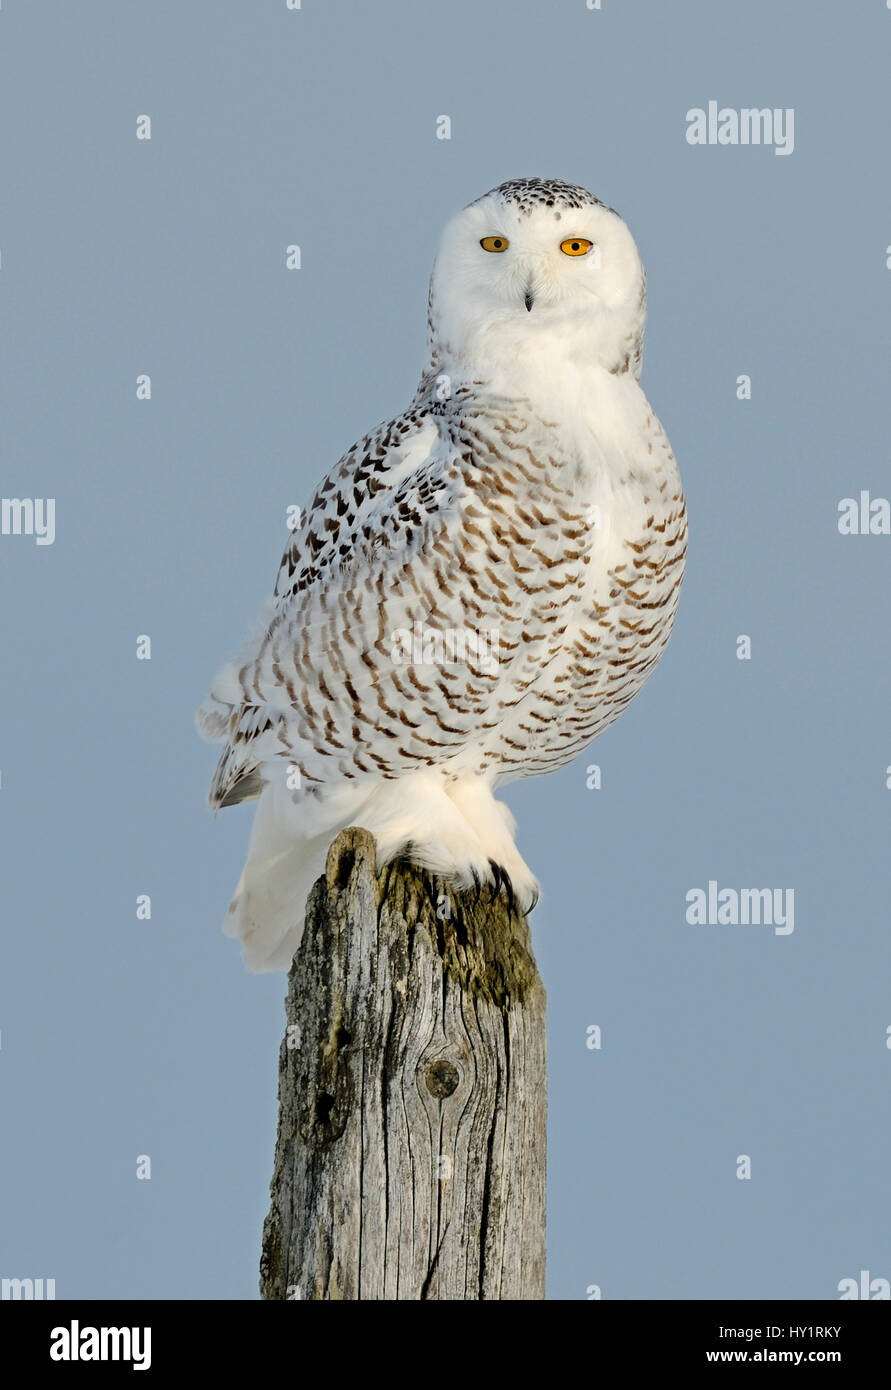 Snowy owl (Bubo scandiaca) perched on post, Canada. Stock Photo